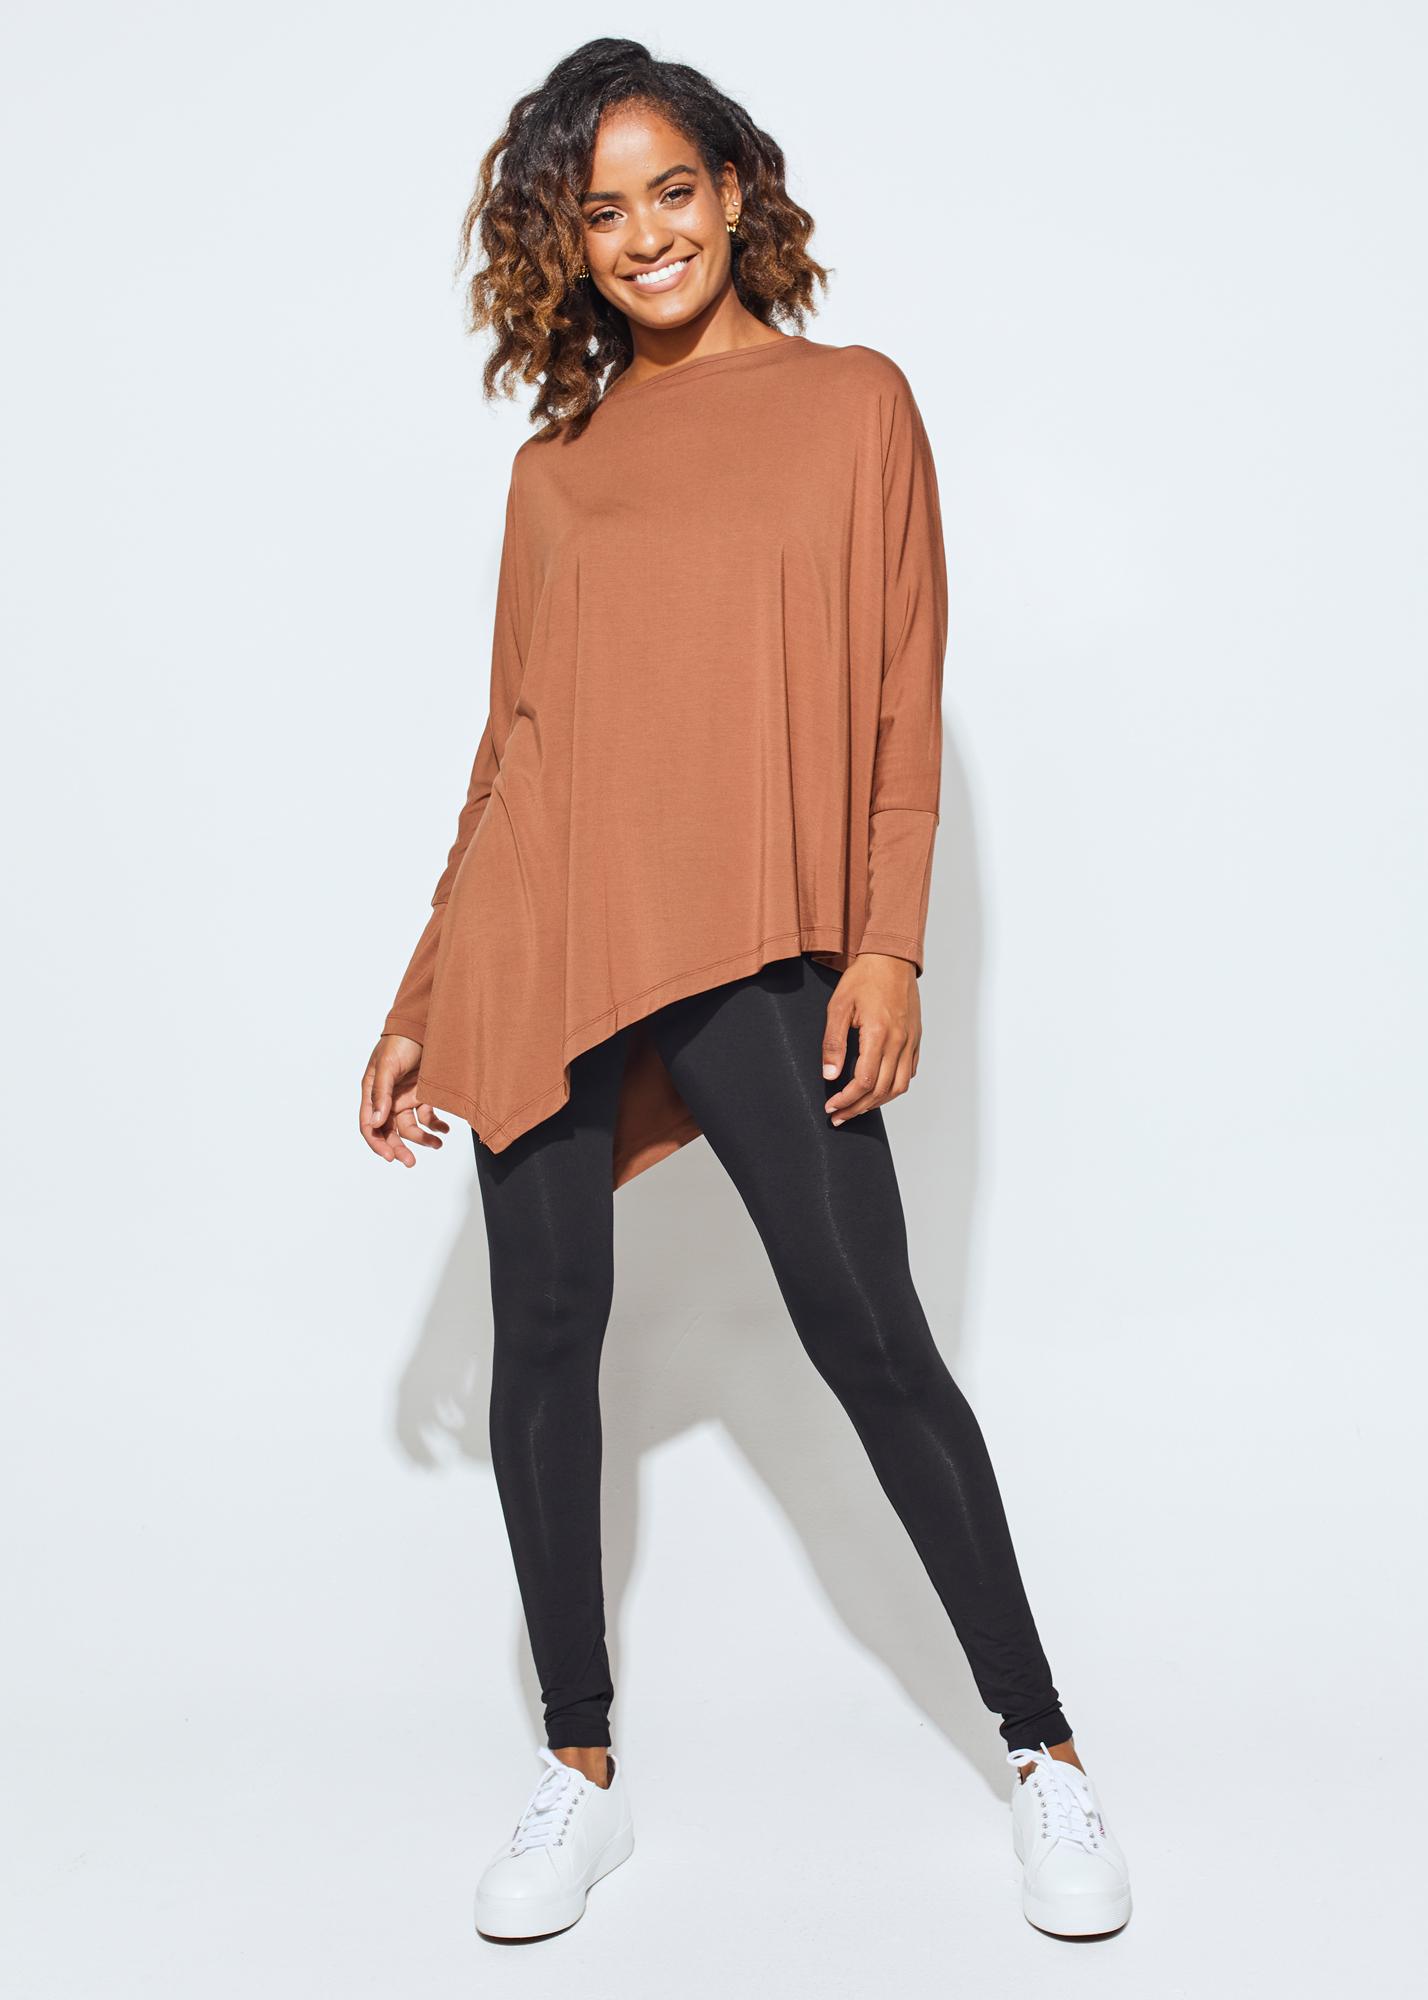 The Susie Top